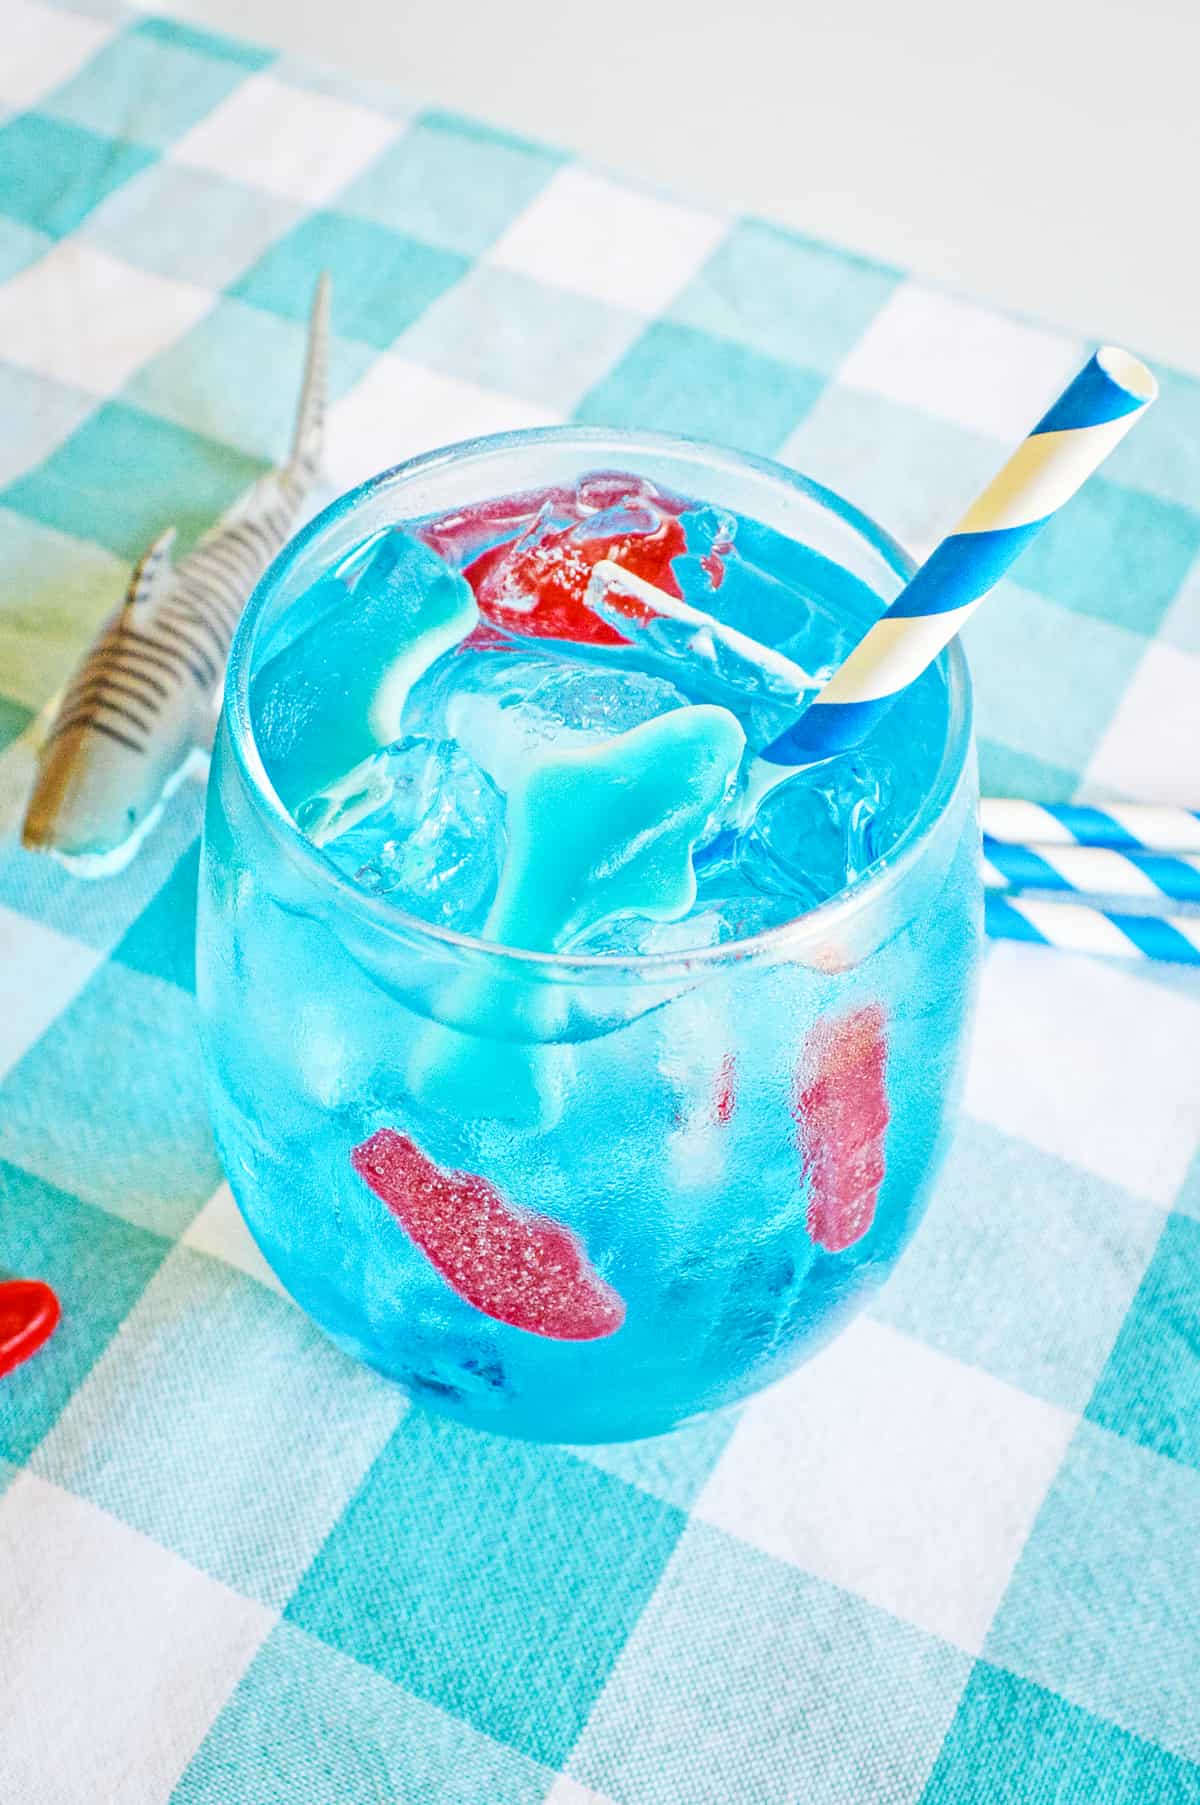 Homemade version of Sonic's ocean water drink in a glass with ice, swedish fish, gummy shark, and blue and white paper straw